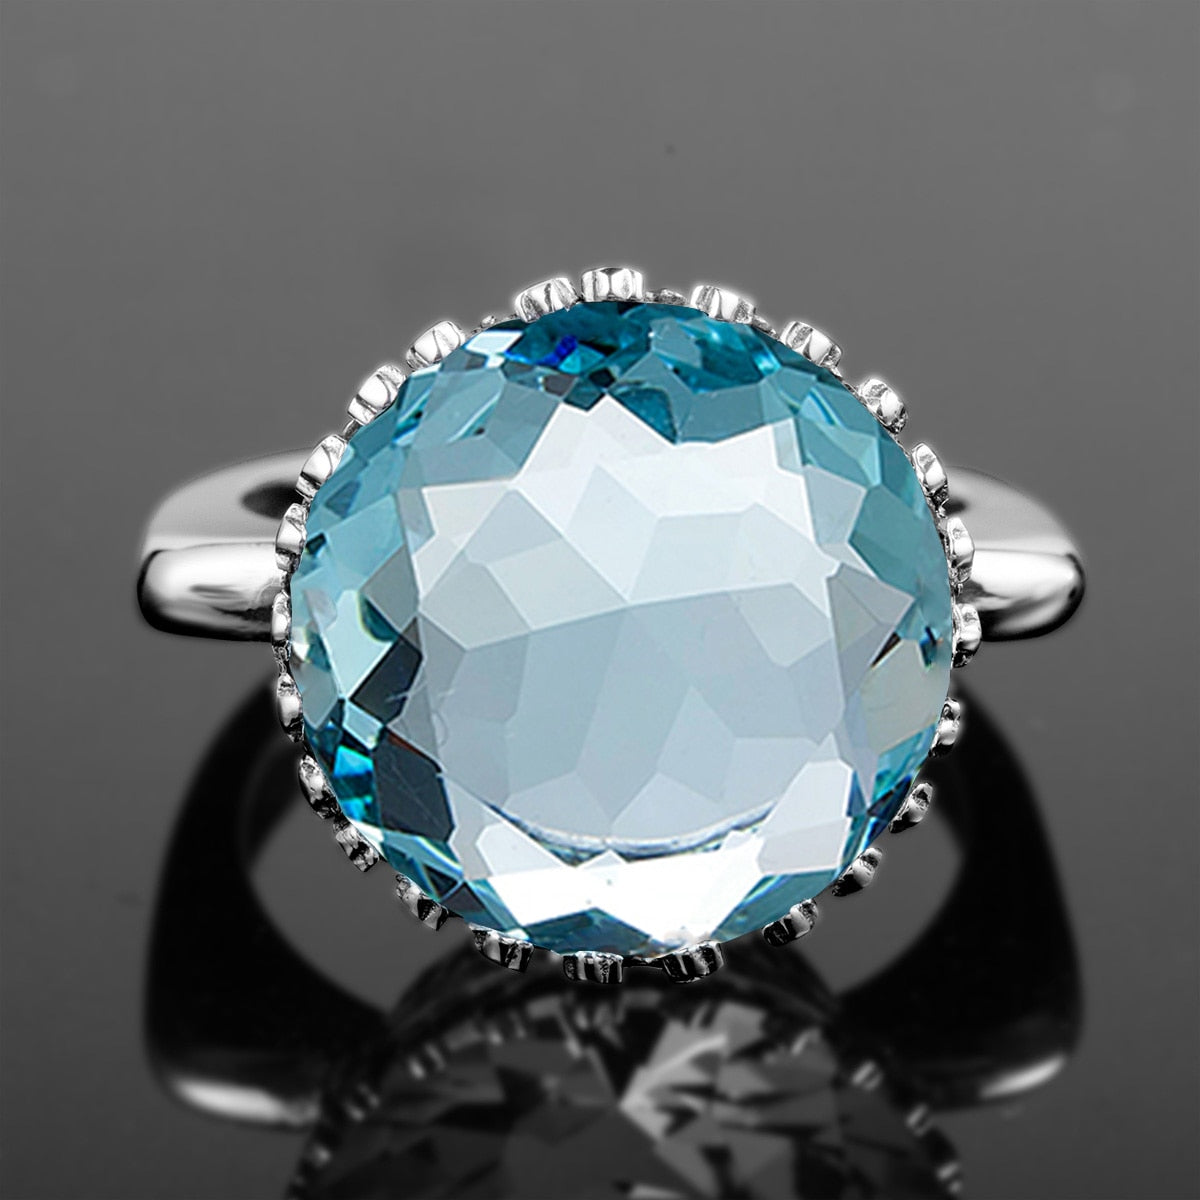 Szjinao Vintage 100% 925 Sterling Silver 15ct Round Created Aquamarine Ring For Women Famous Branded Handmade Fine Jewelery 2021